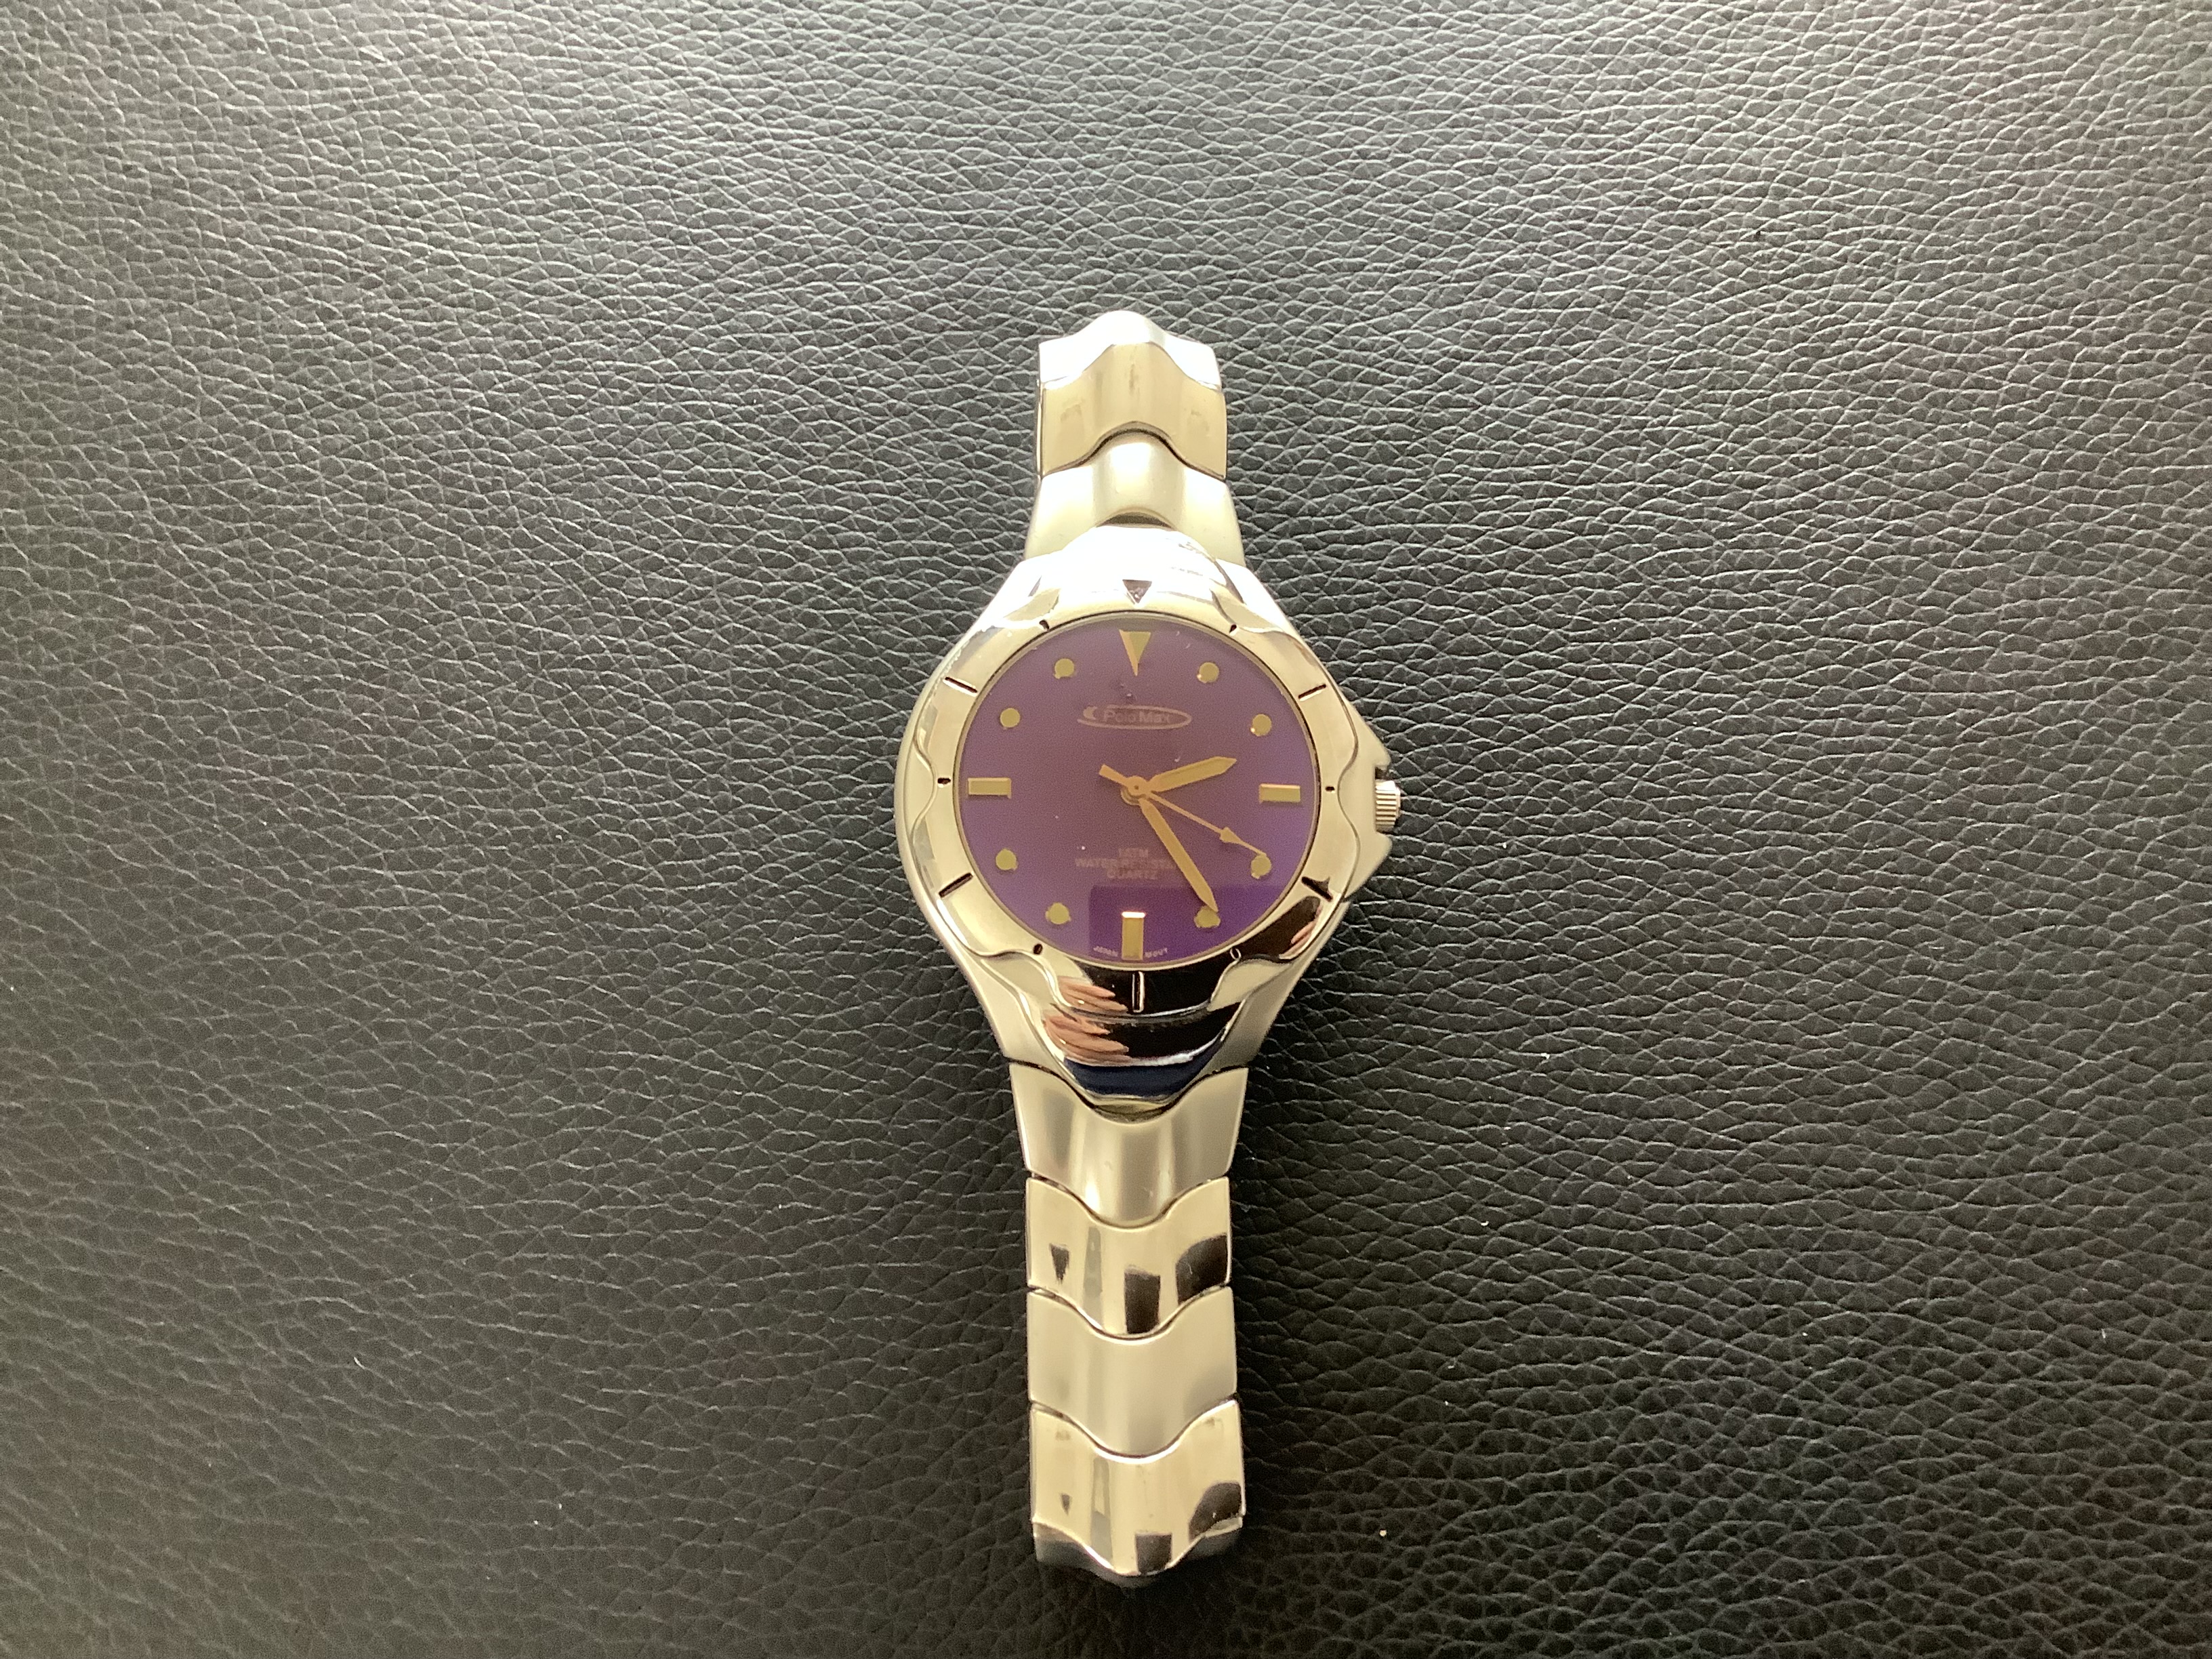 Polo Max Unisex 'As New' Wristwatch with mirror effect Face (GS 145) - Image 4 of 6